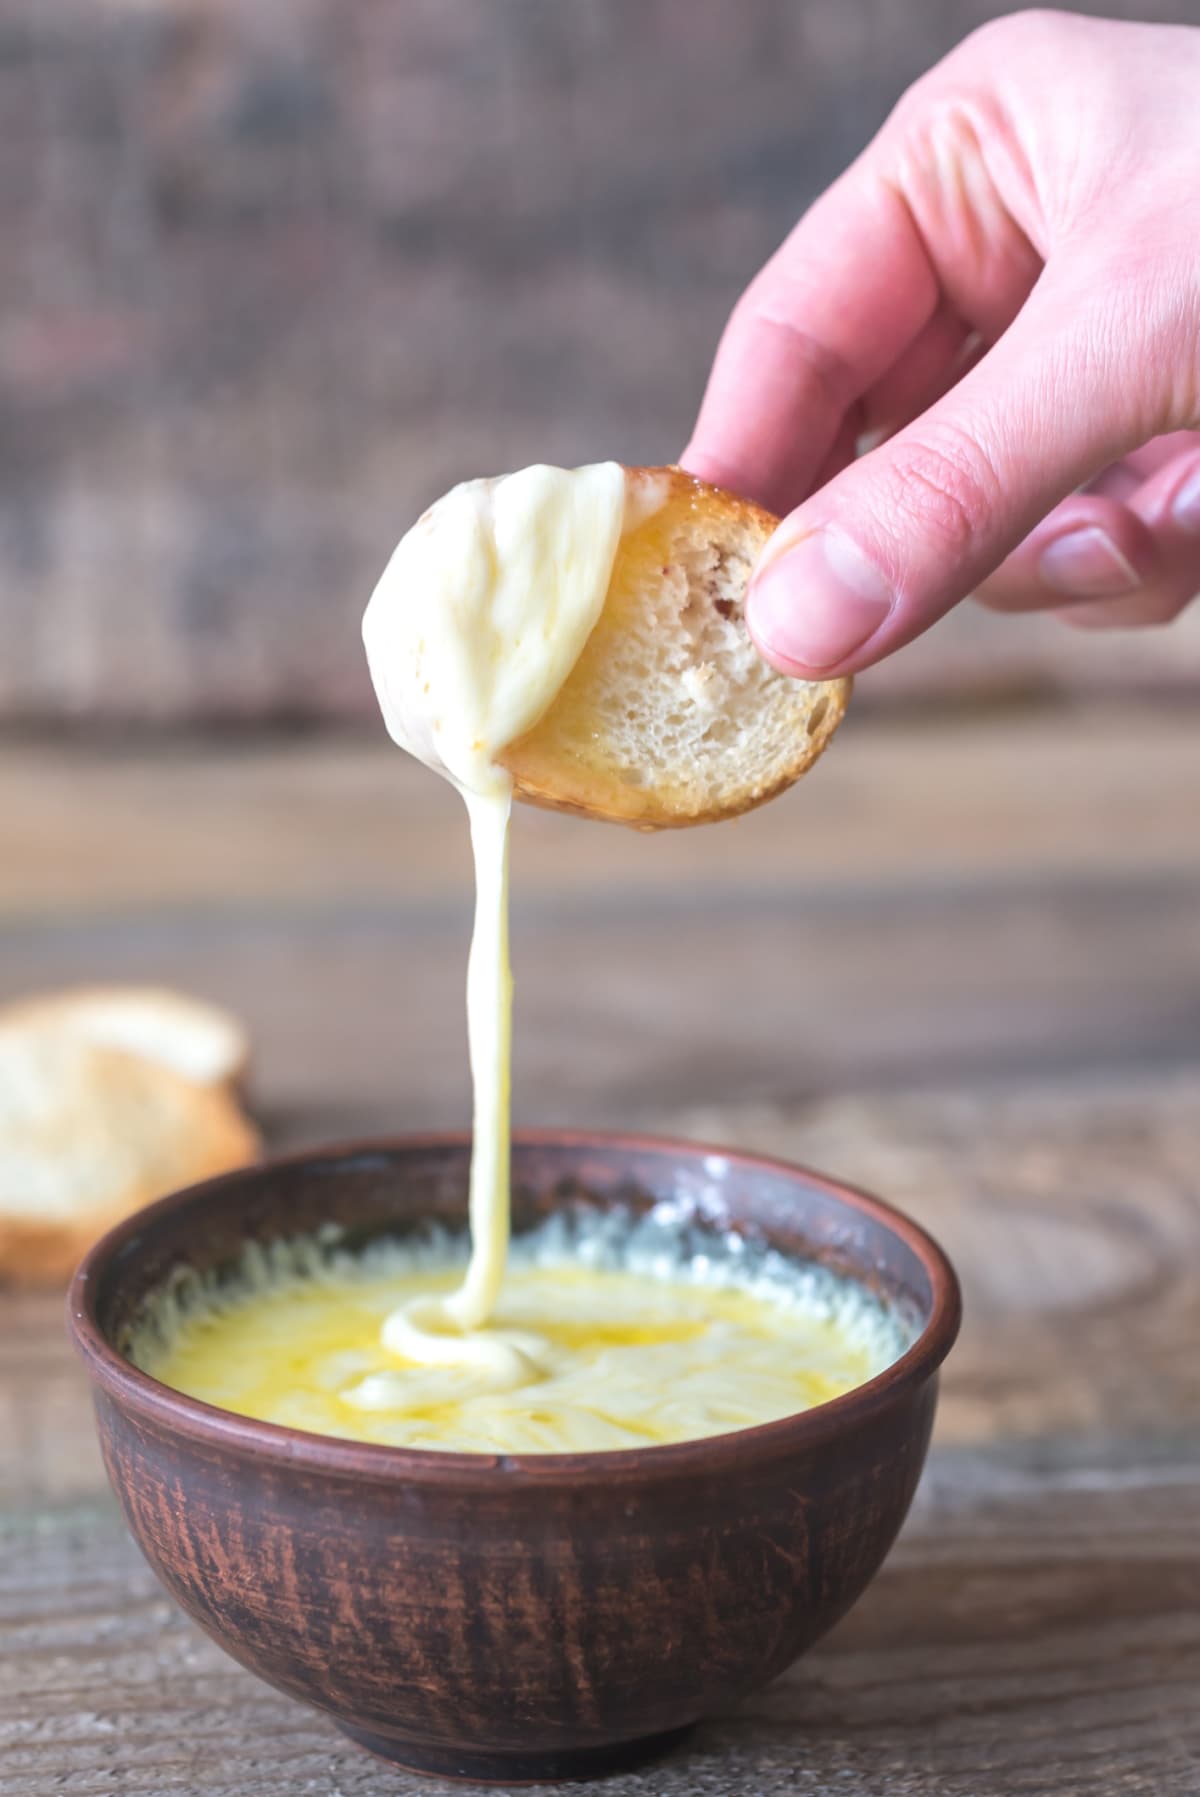 Dipping a small toast into queso fundido